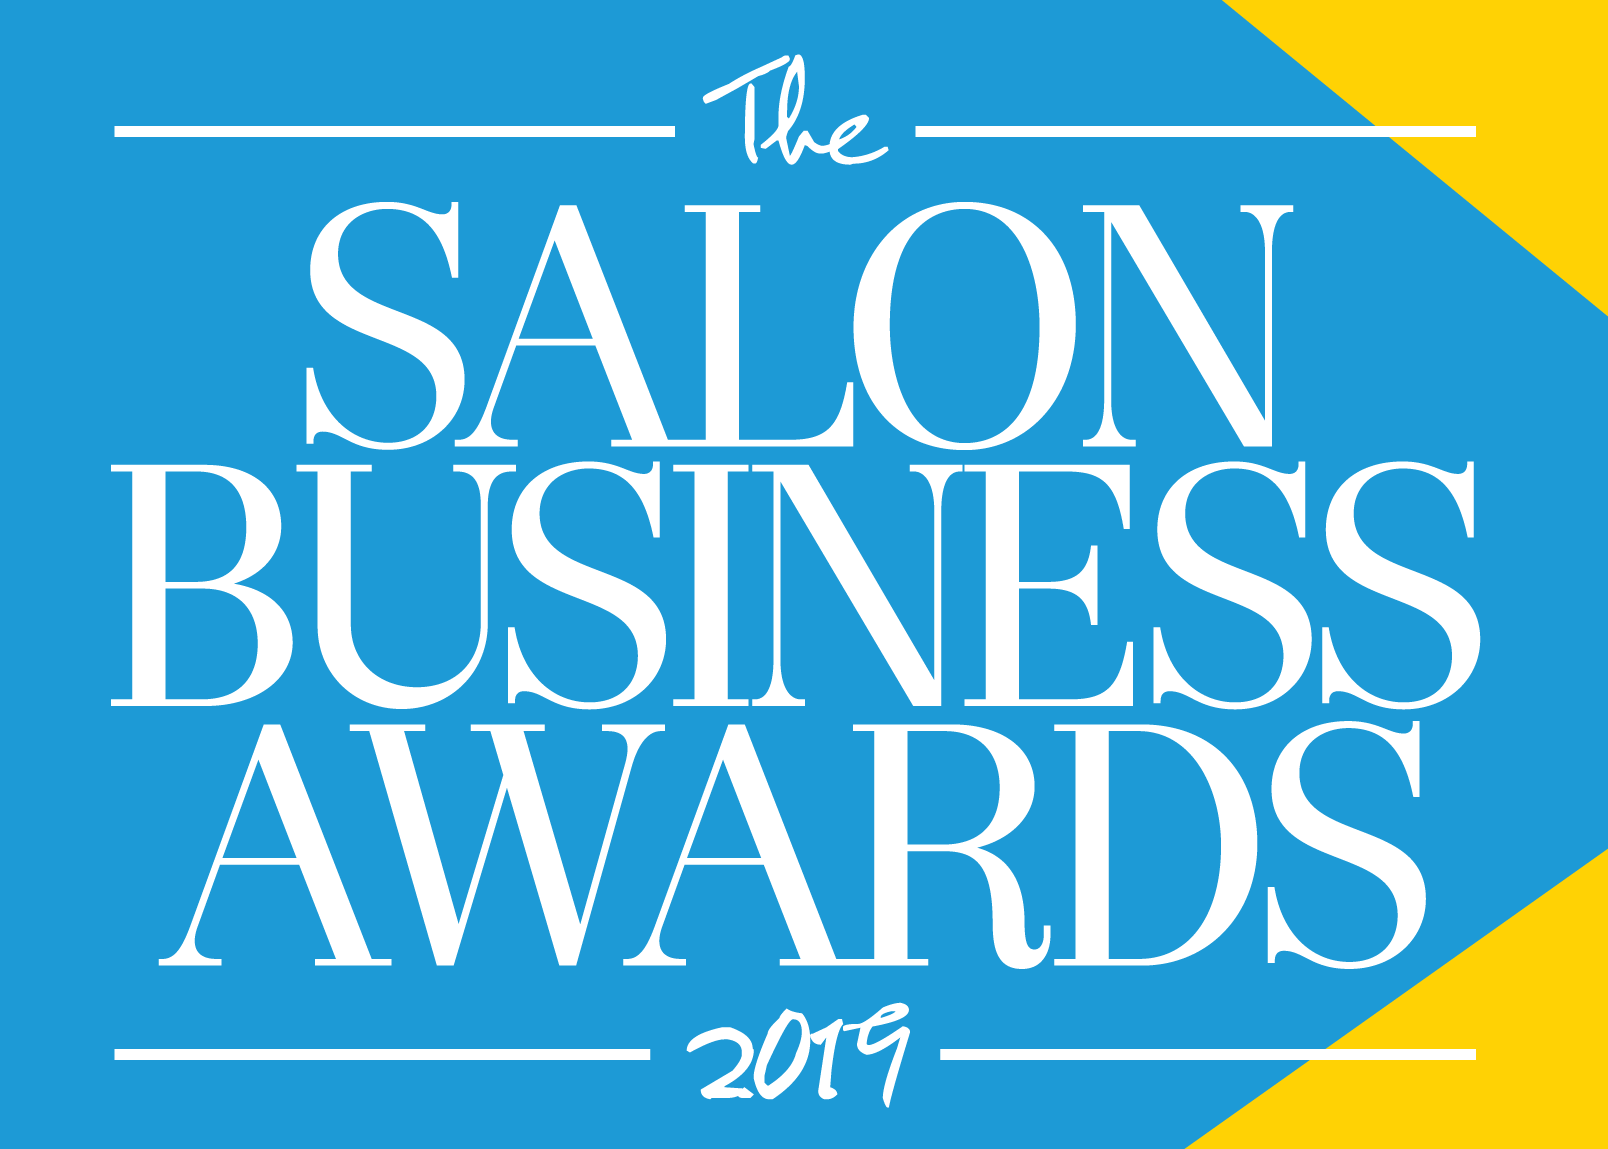 elements Lifestyle Are Finalists in The Salon Business Awards!